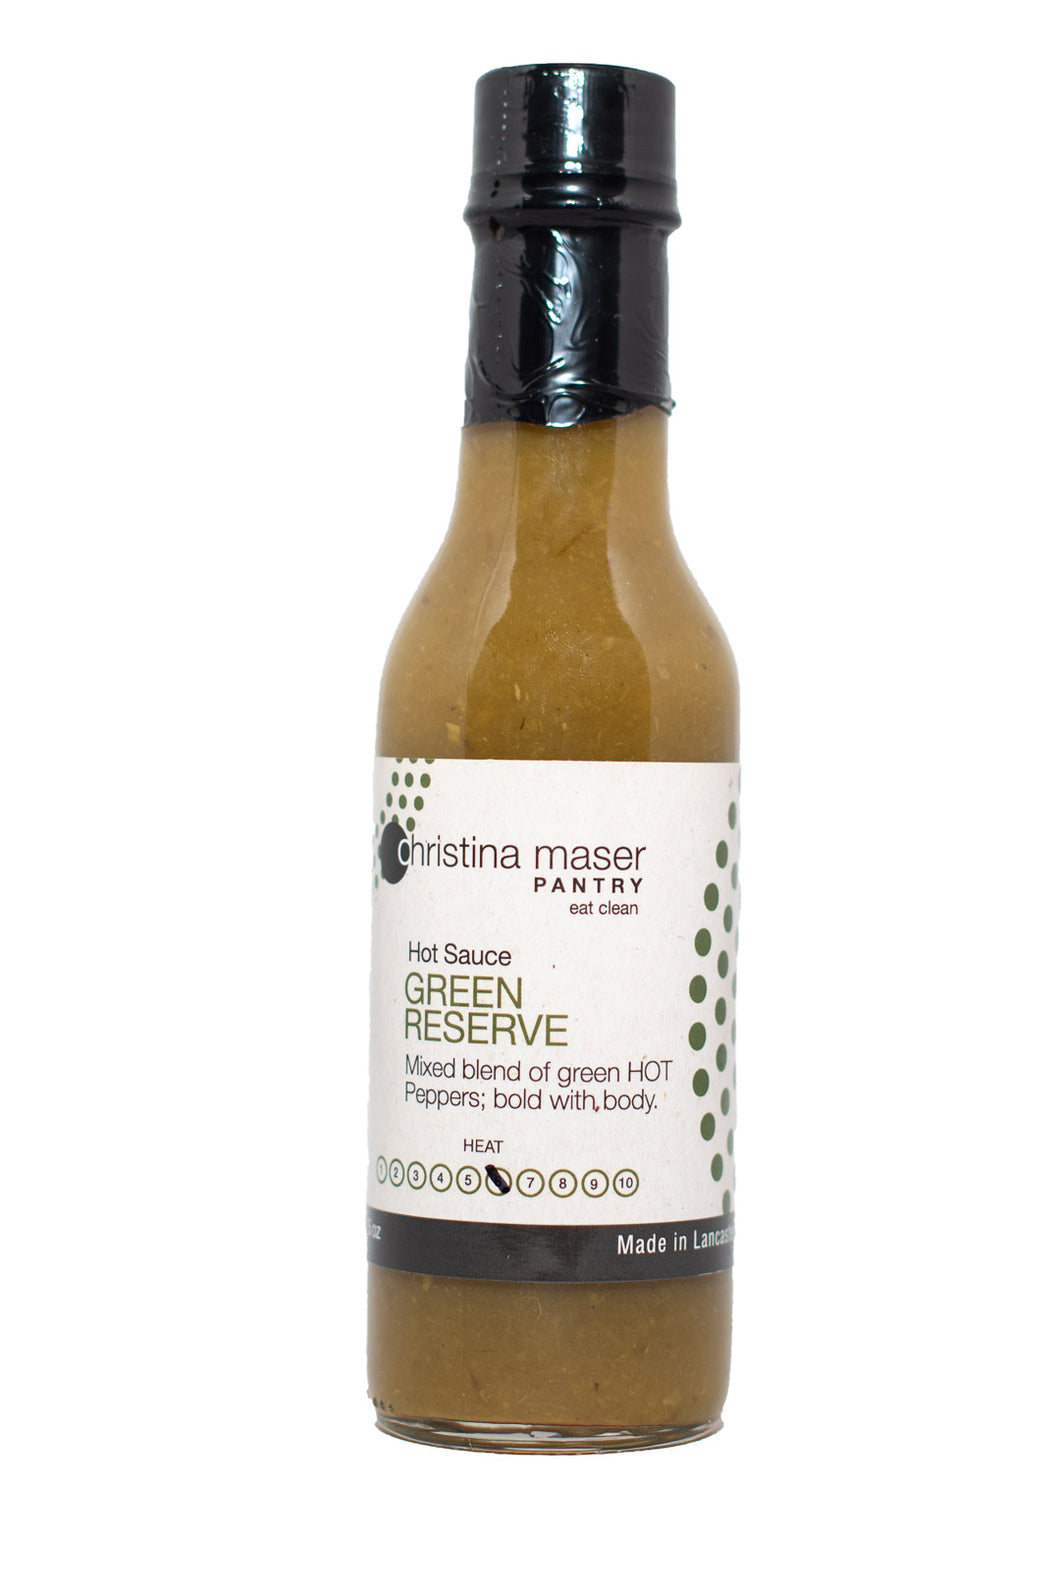 Green Reserve hot sauce in a glass bottle with black lid. Hot sauce is green. Label is off white with dark green accents.